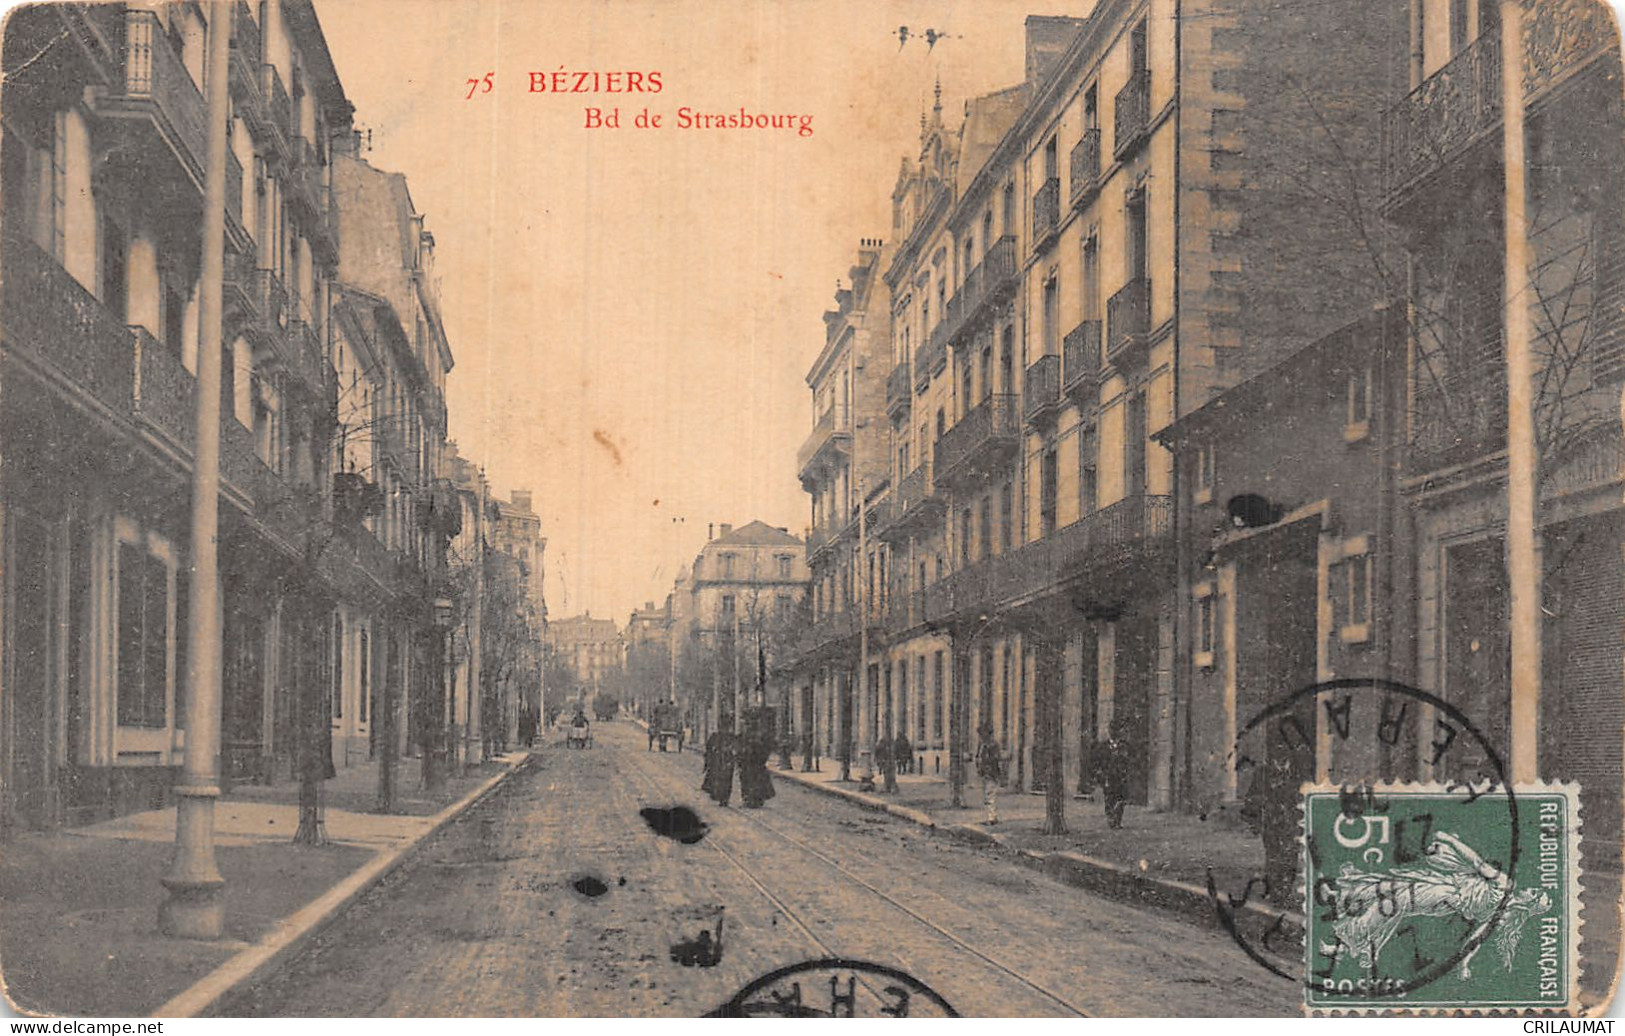 34-BEZIERS-N°5153-E/0249 - Beziers